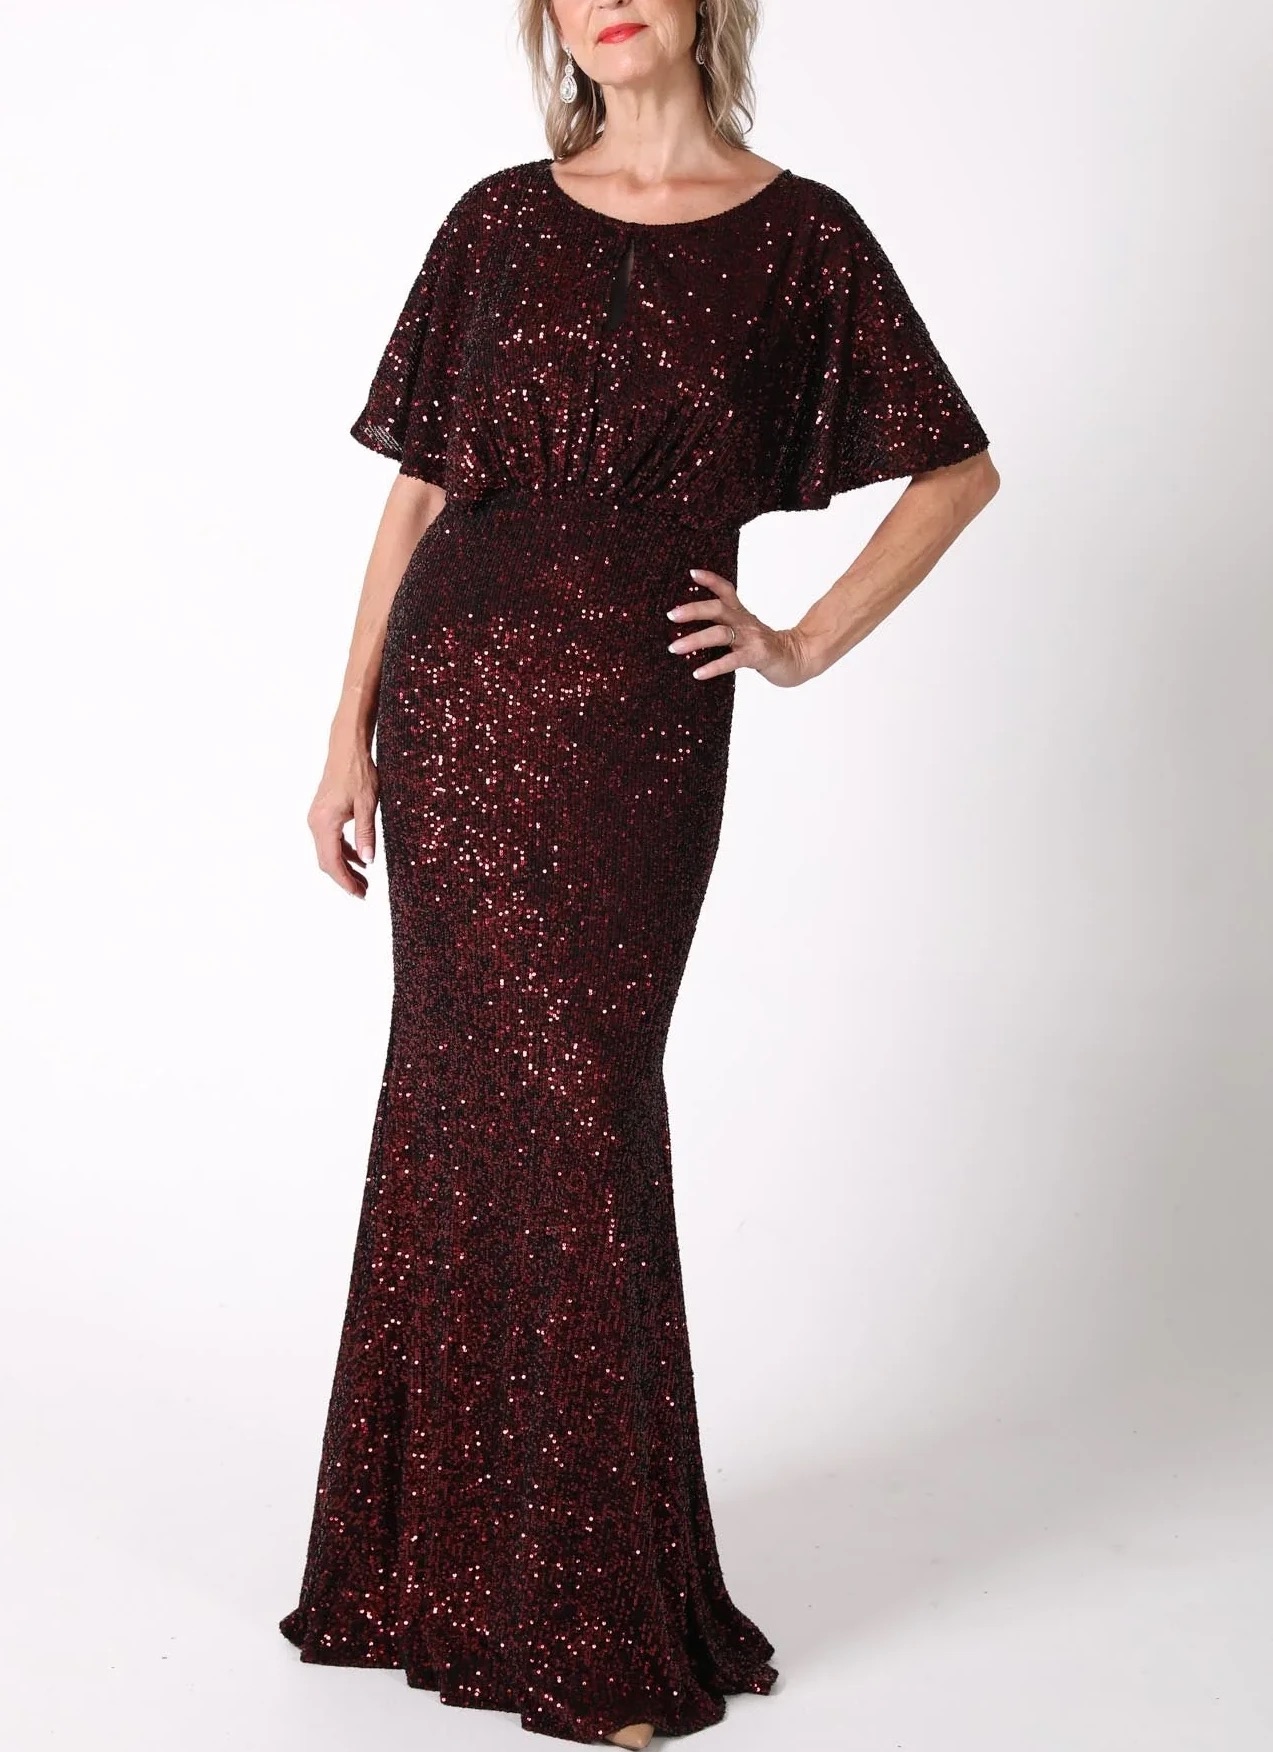 Sequined Butterfly-Sleeves Mermaid Long Mother Of The Bride Dresses